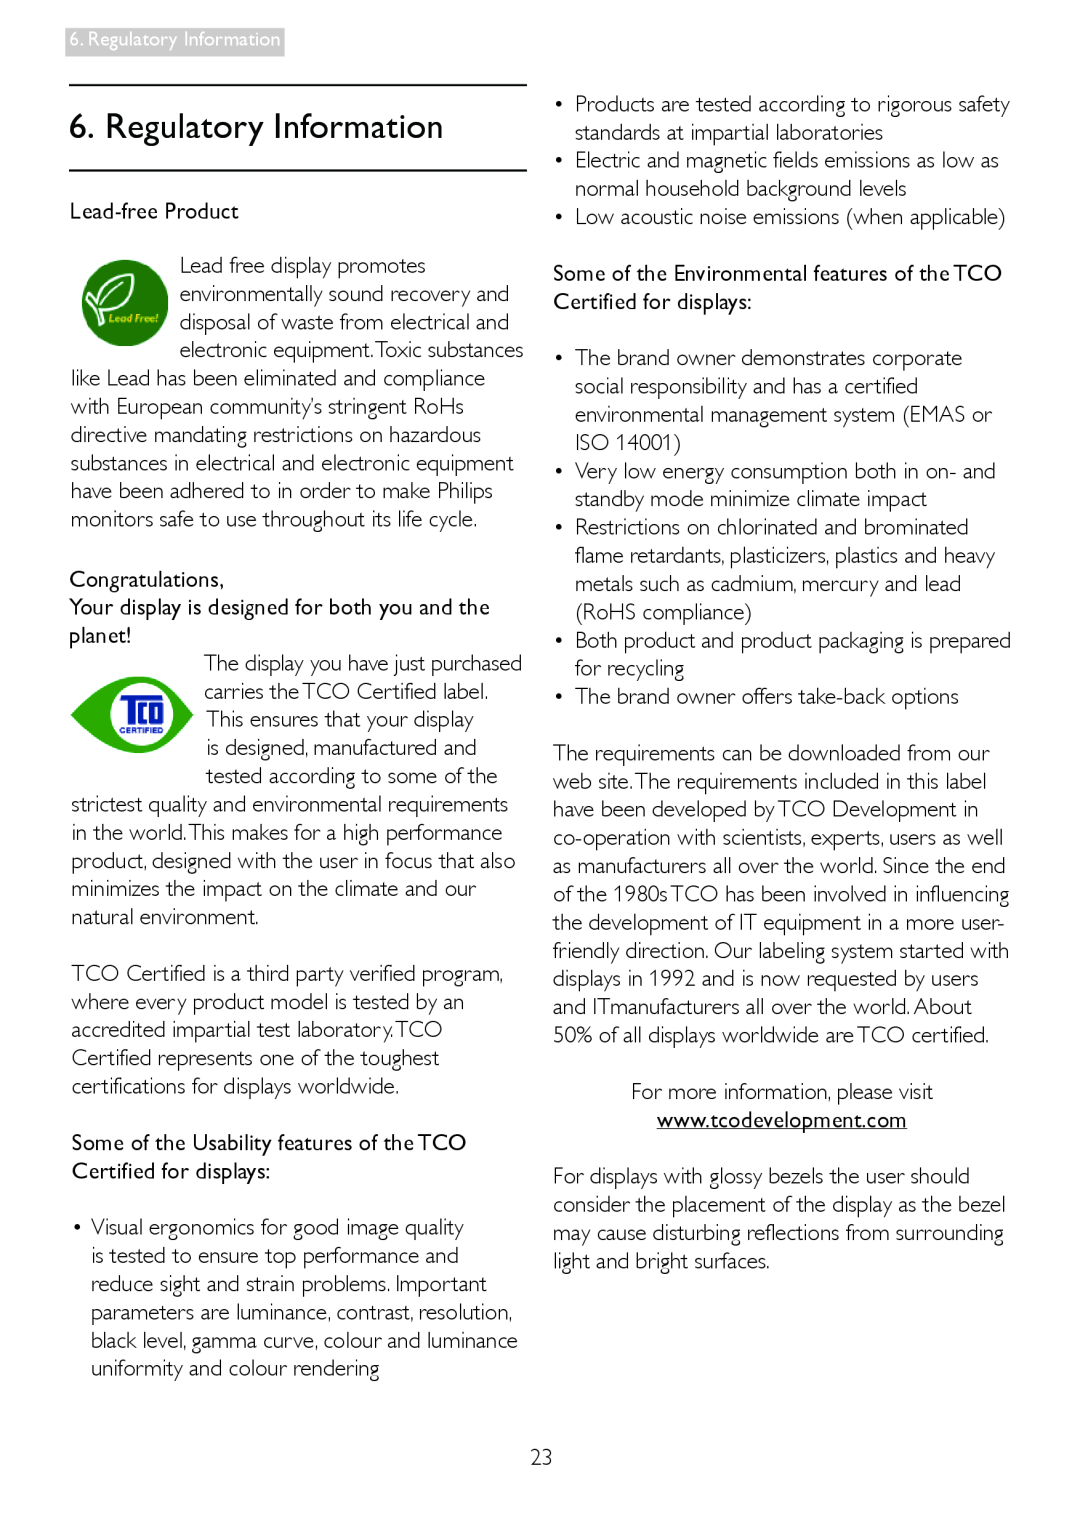 Philips 197E3L Regulatory Information, Lead-free Product, Some of the Usability features of the TCO Certified for displays 